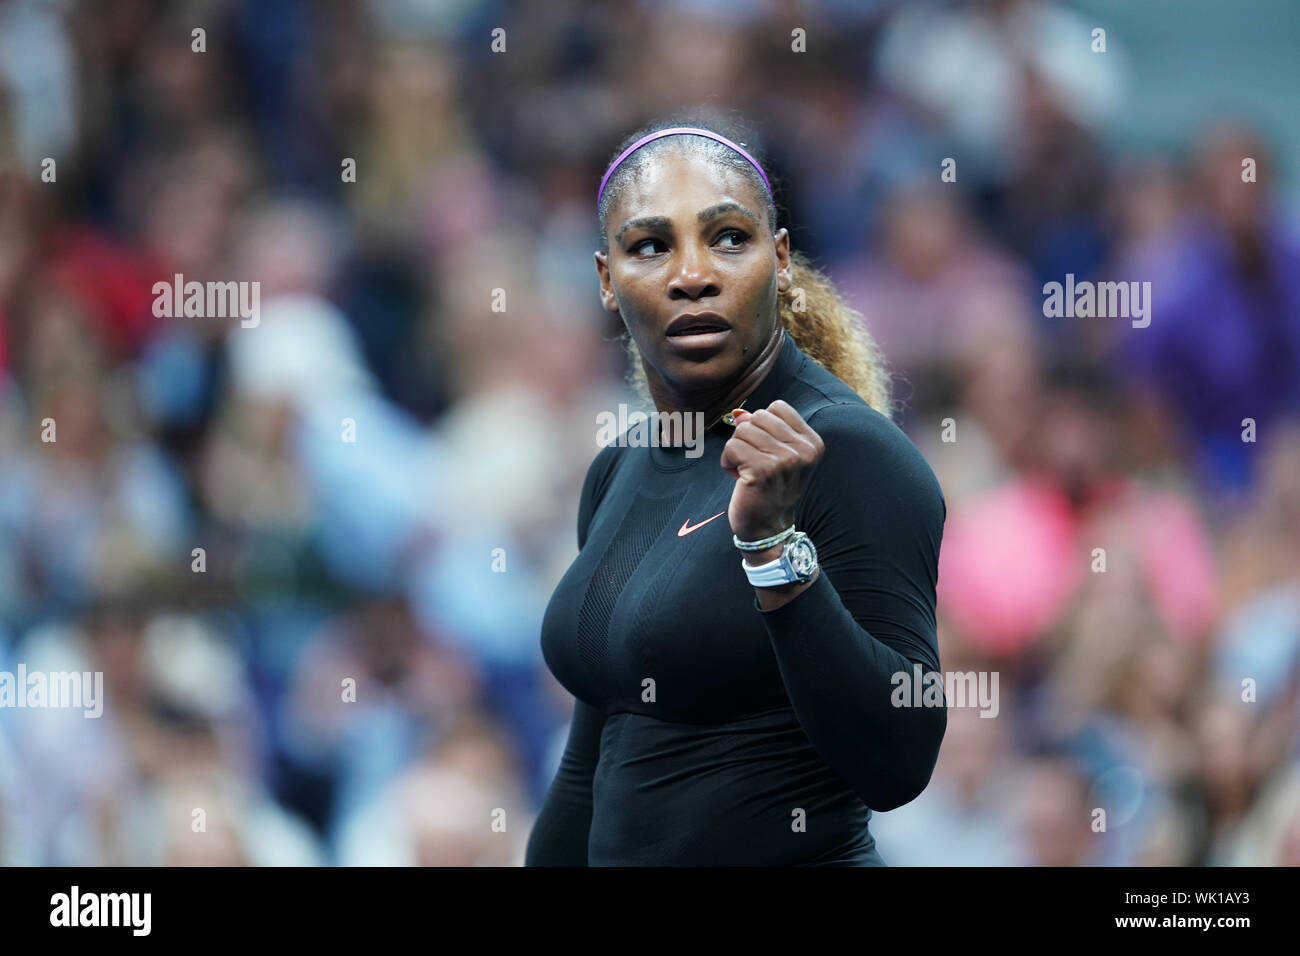 New York, USA. 3rd Sep, 2019. Serena Williams celebrates after women's singles quarterfinal match between Wang Qiang of China and Serena Williams of the United States at the 2019 US Open in New York, the United States, Sept. 3, 2019. Credit: Liu Jie/Xinhua/Alamy Live News Stock Photo